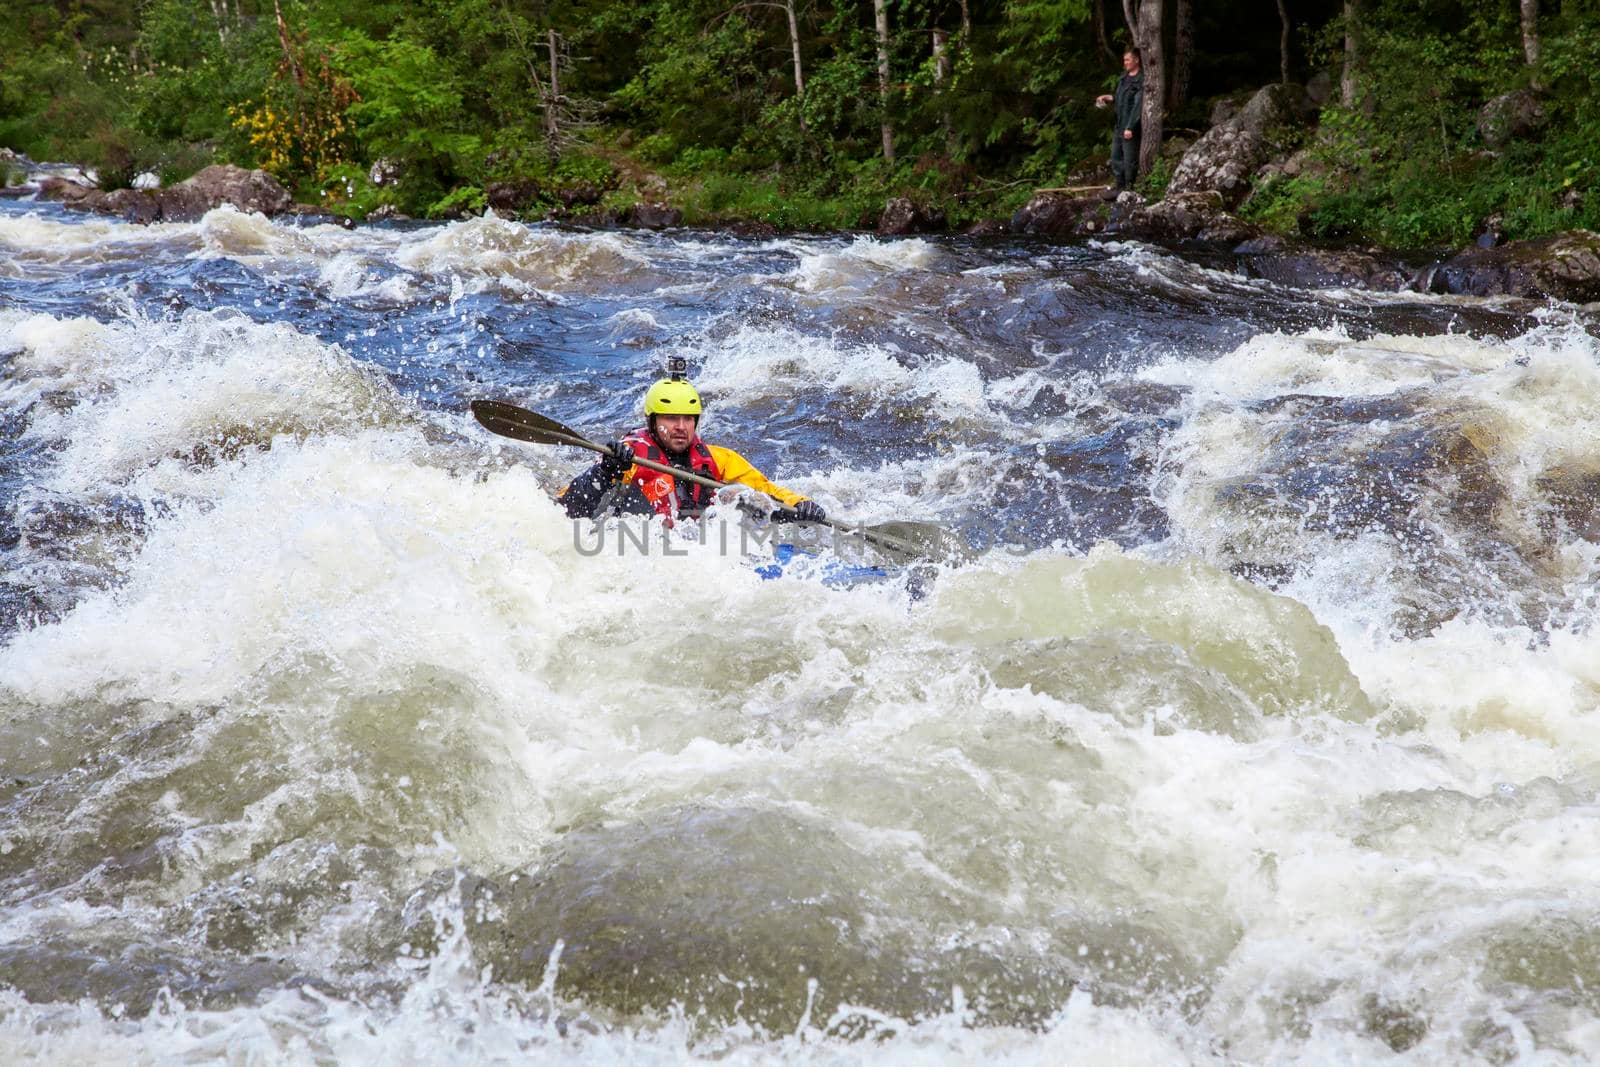 Kayaker in the whitewater on a river in Republic of Karelia, Russia